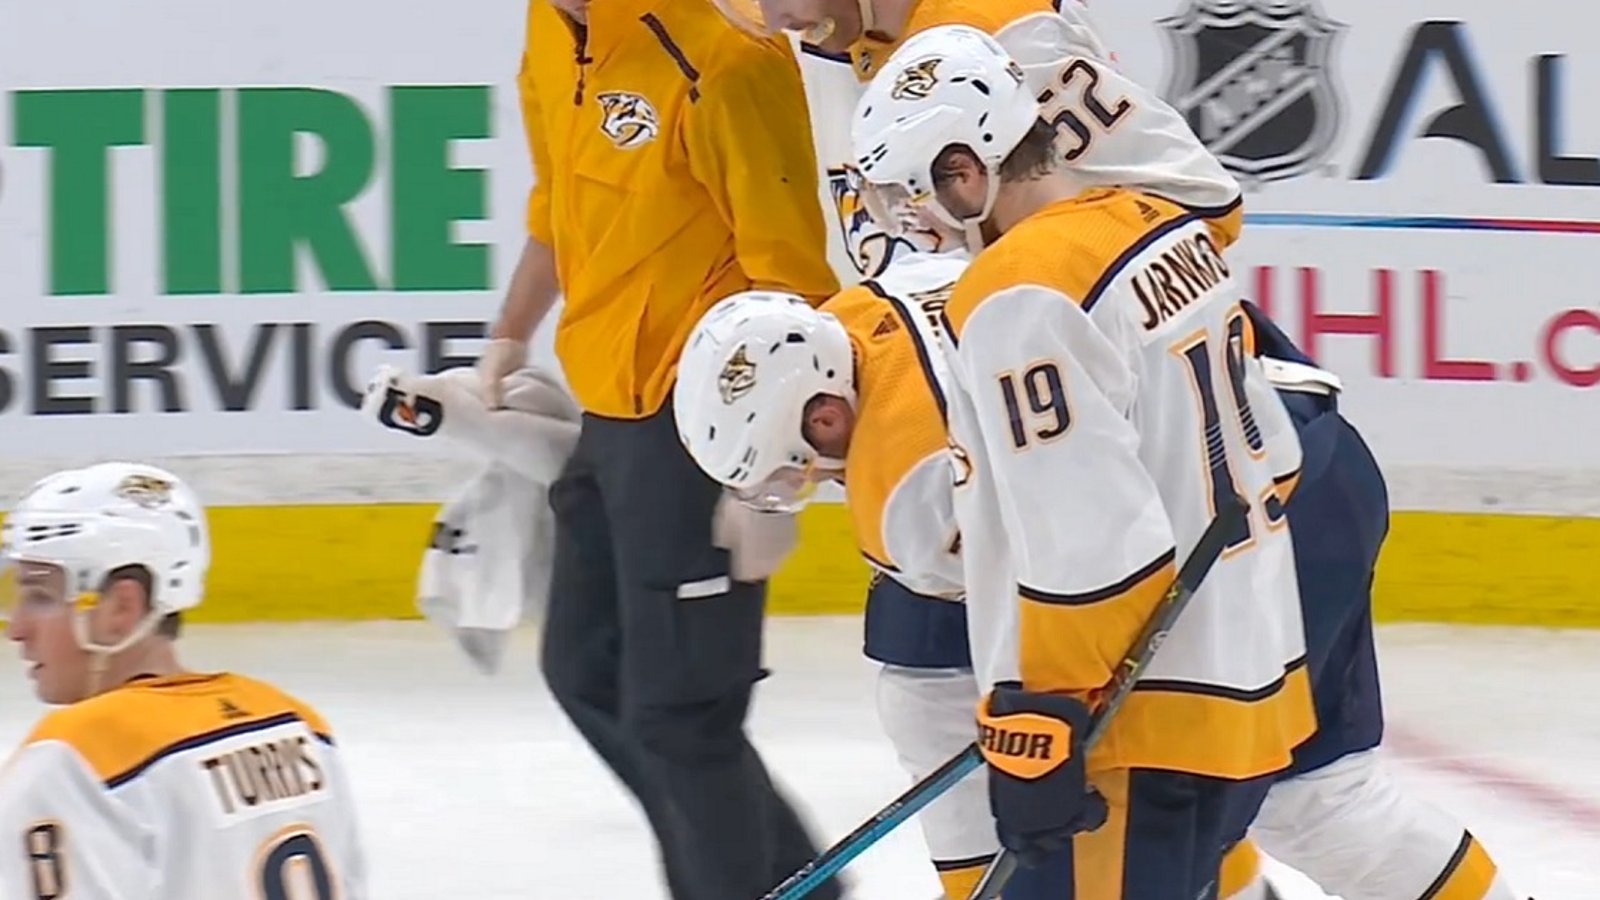 Weber carried off the ice after knee on knee from Bruins' Kuraly.